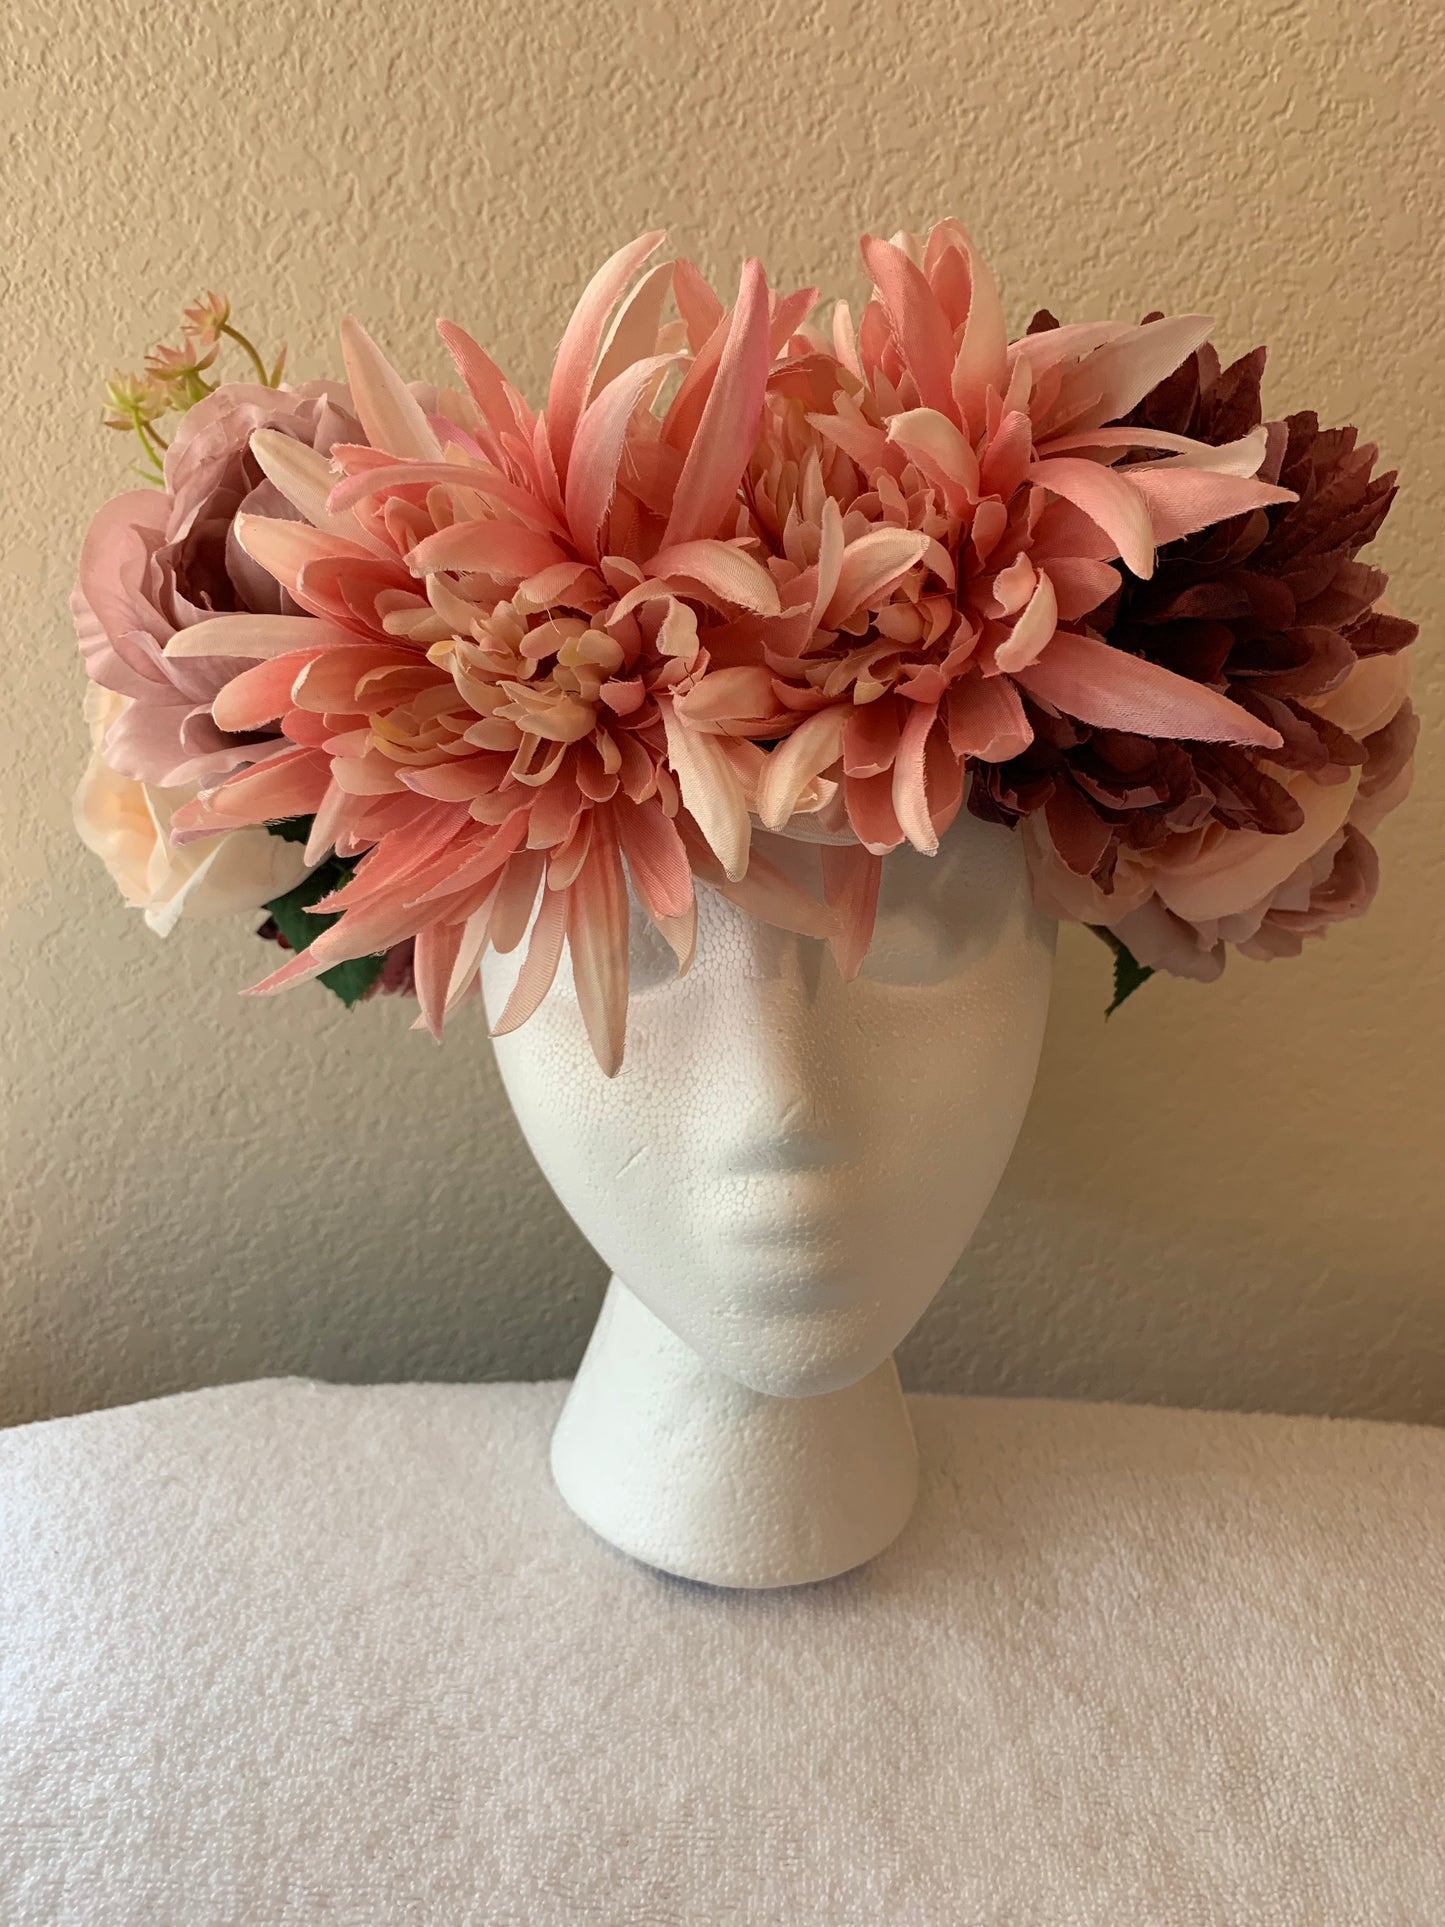 Large Wreath- Shades of Pink Flowers